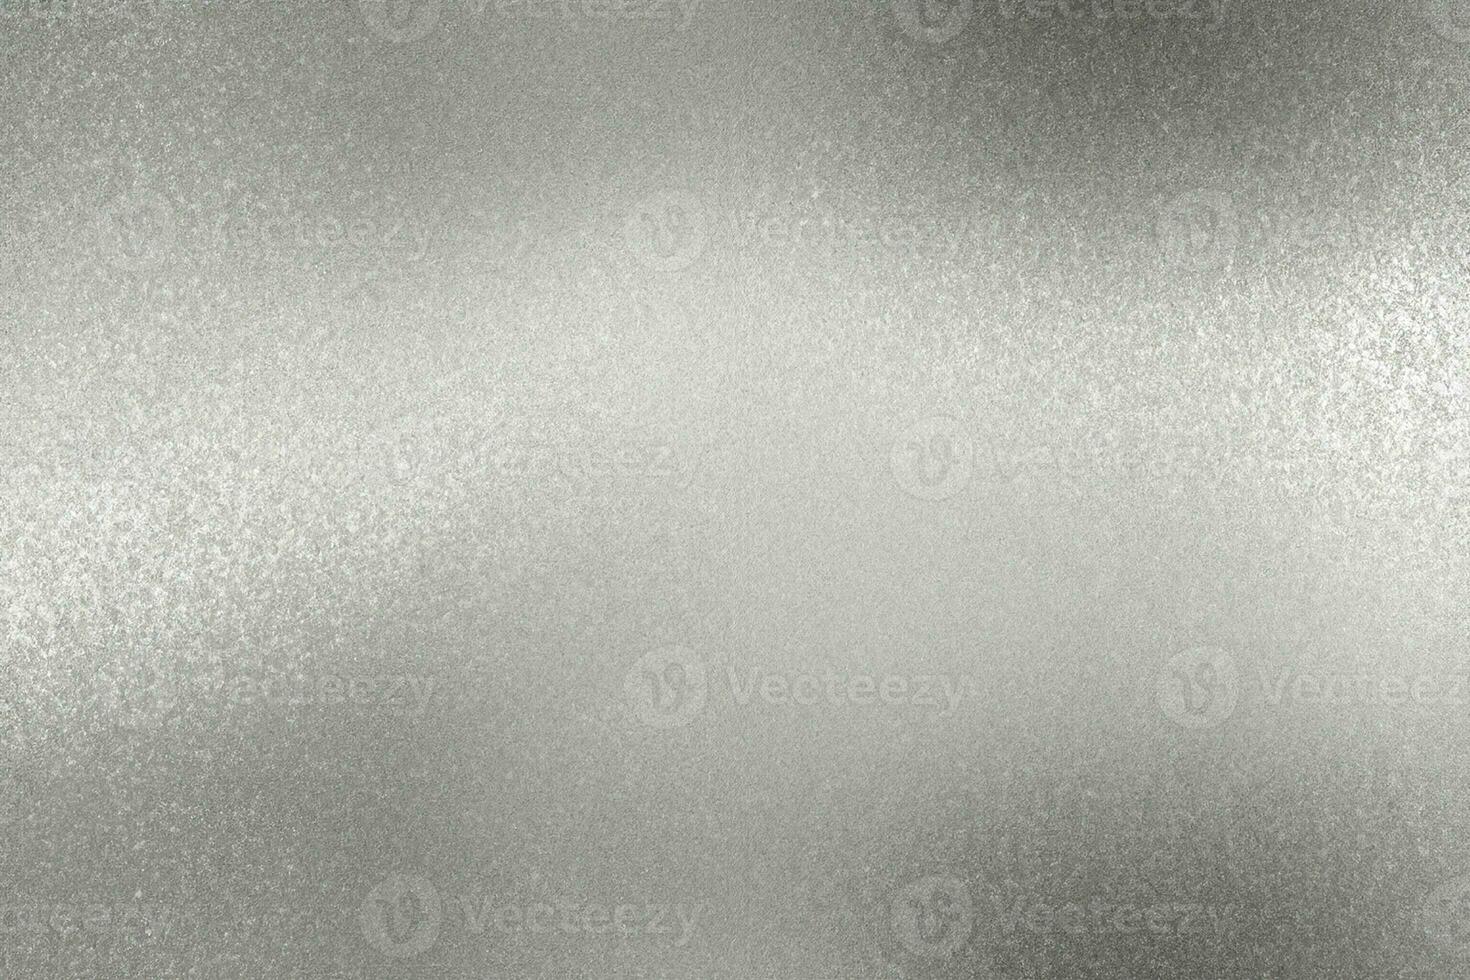 Texture of rough silver metallic plate, abstract background photo